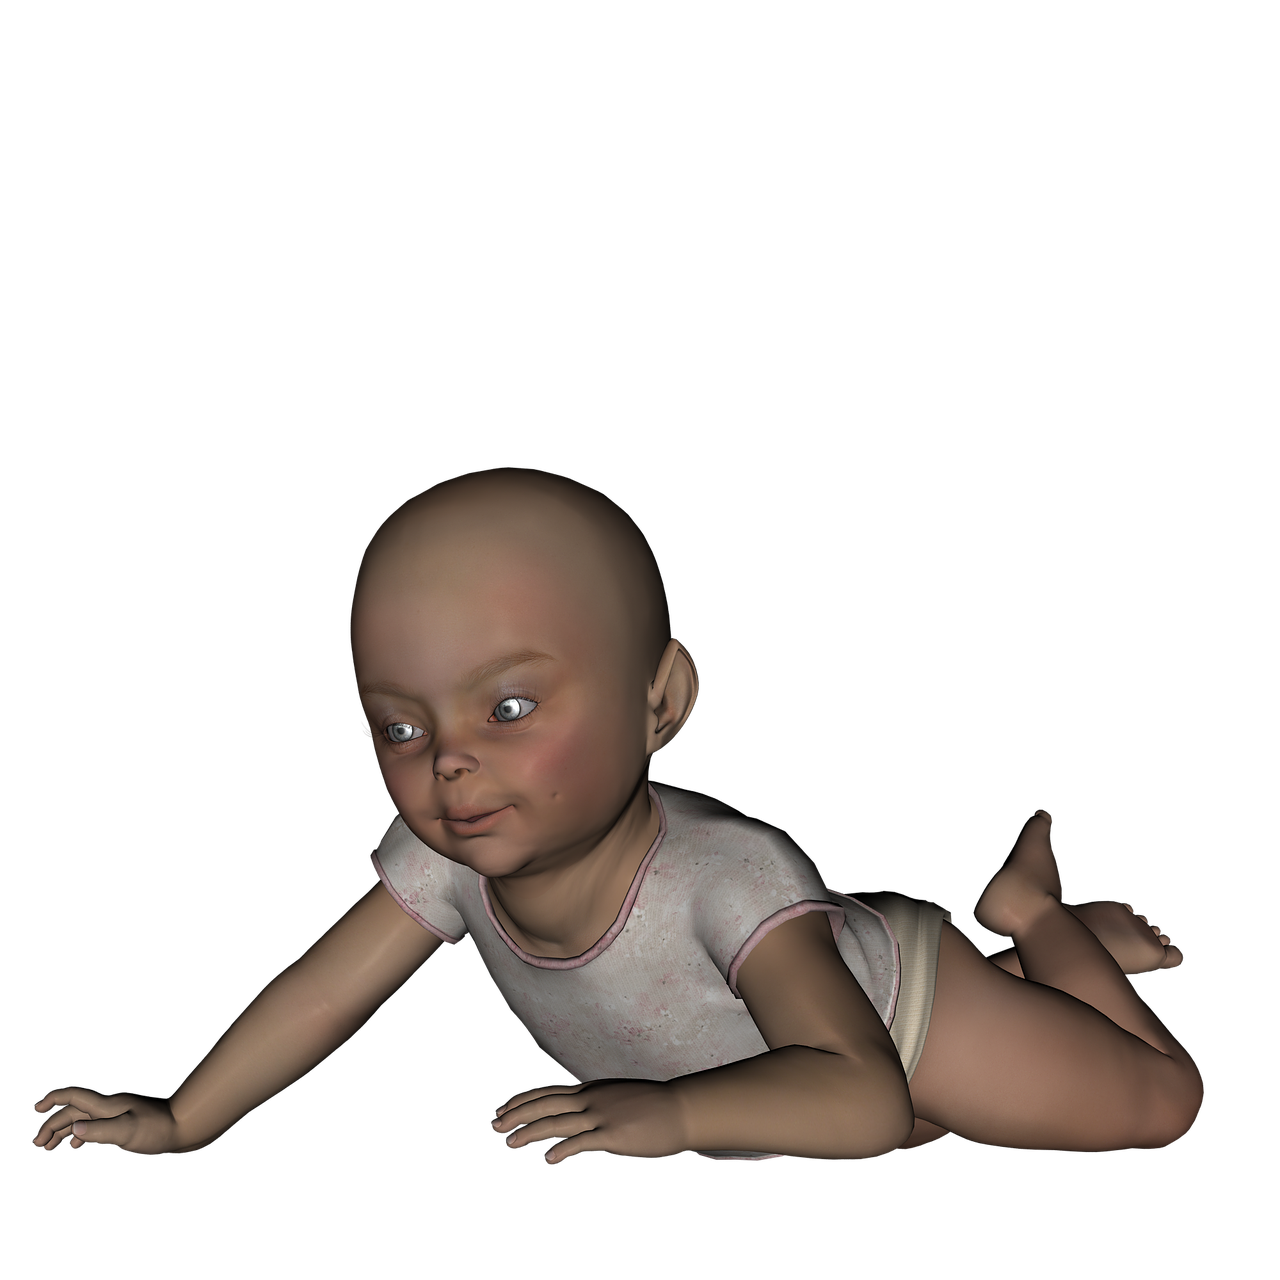 a baby that is laying down on the ground, a 3D render, digital art, big glowing eyes, low quality 3d model, crawling out of a dark room, full body image